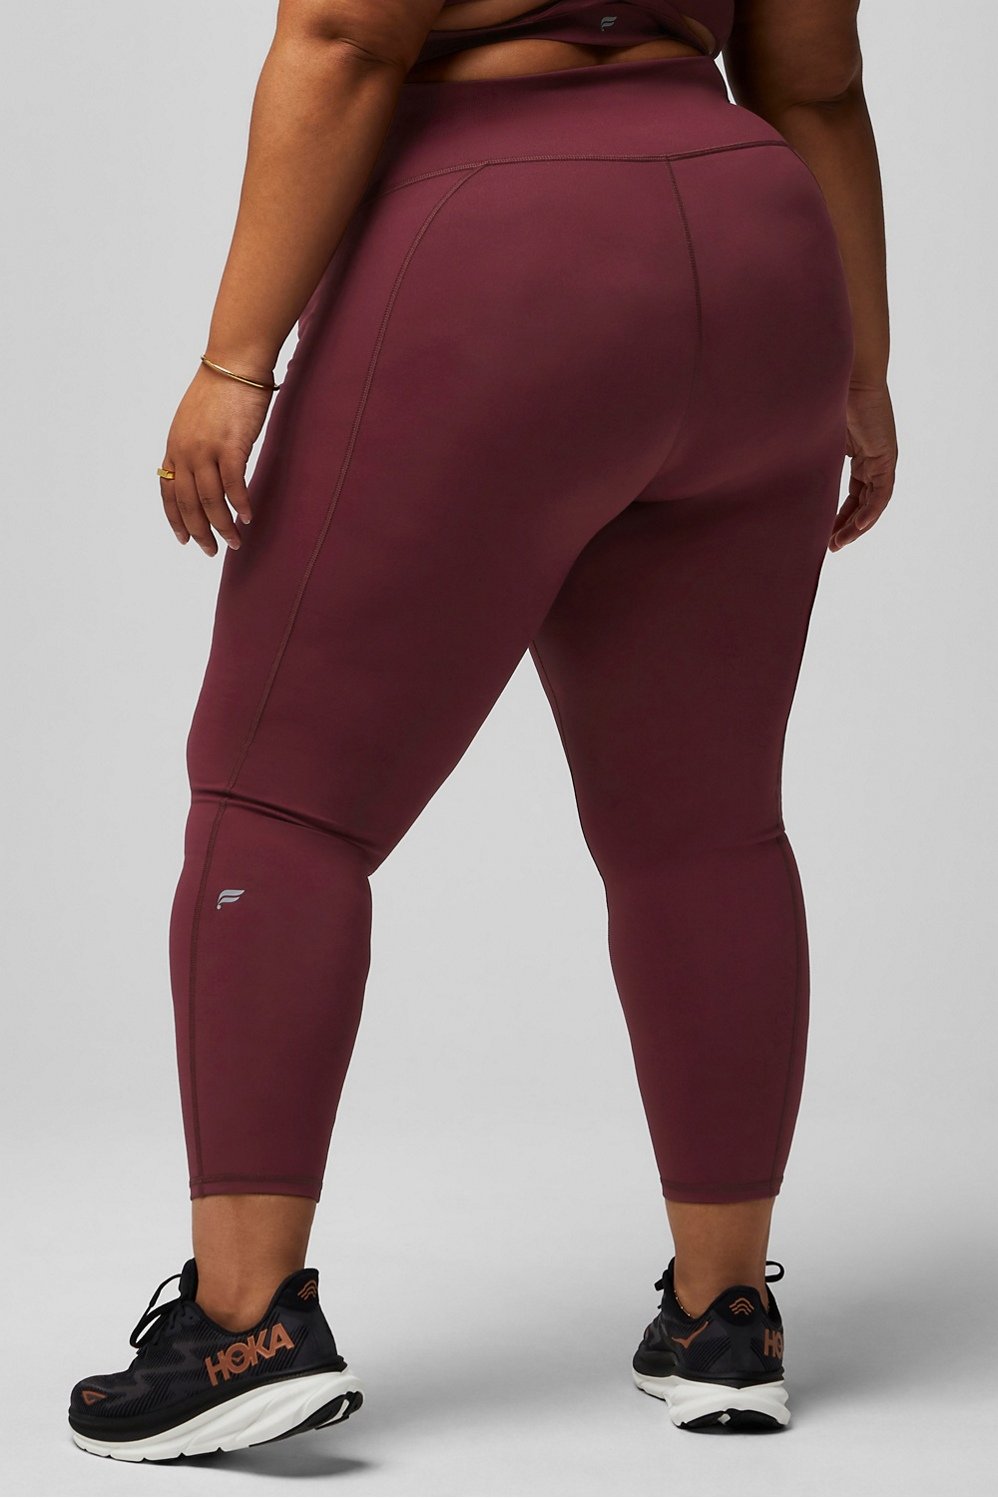 HMGYH satina high waisted leggings for women Solid High Rise Tailored Pants  (Color : Burgundy, Size : 2XL)